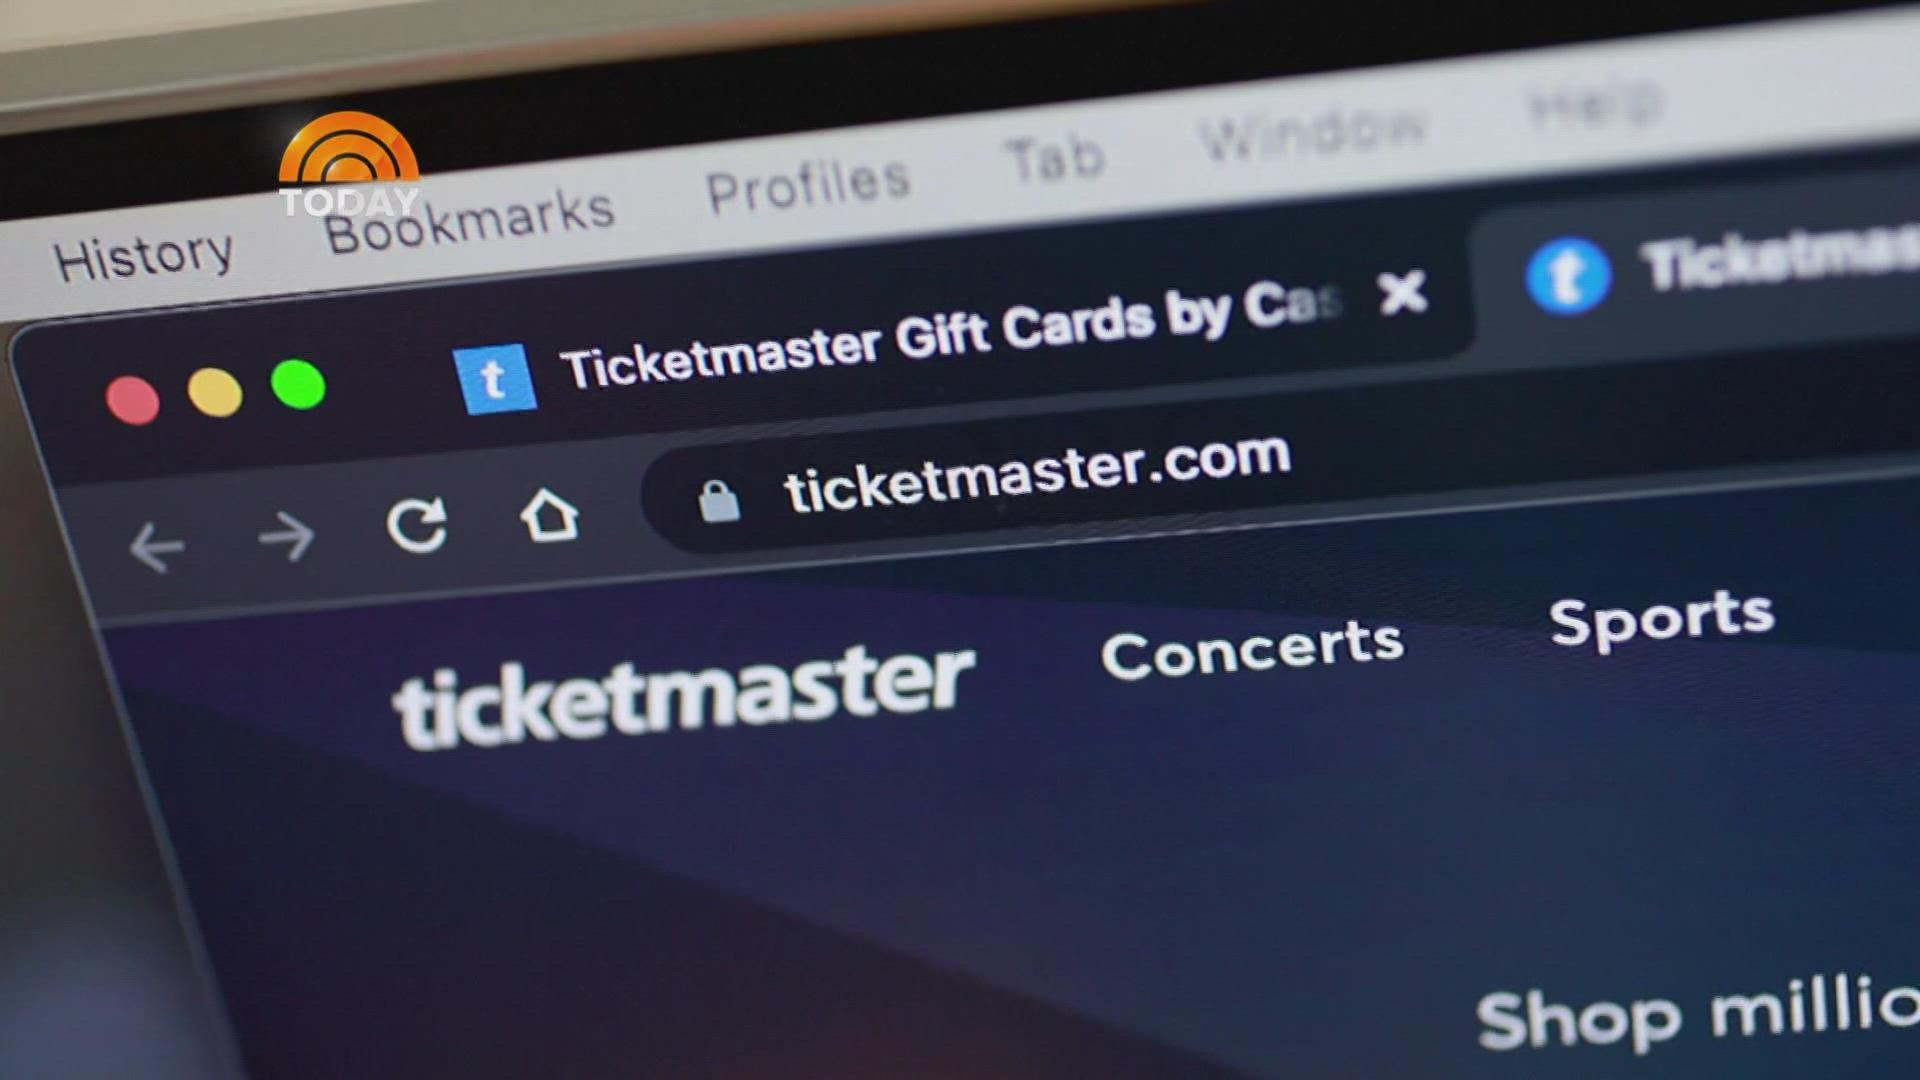 After the Taylor Swift Eras Tour fiasco in November, Ticketmaster is under fire. The site will be grilled about its monopoly practices, like many ticket sites.